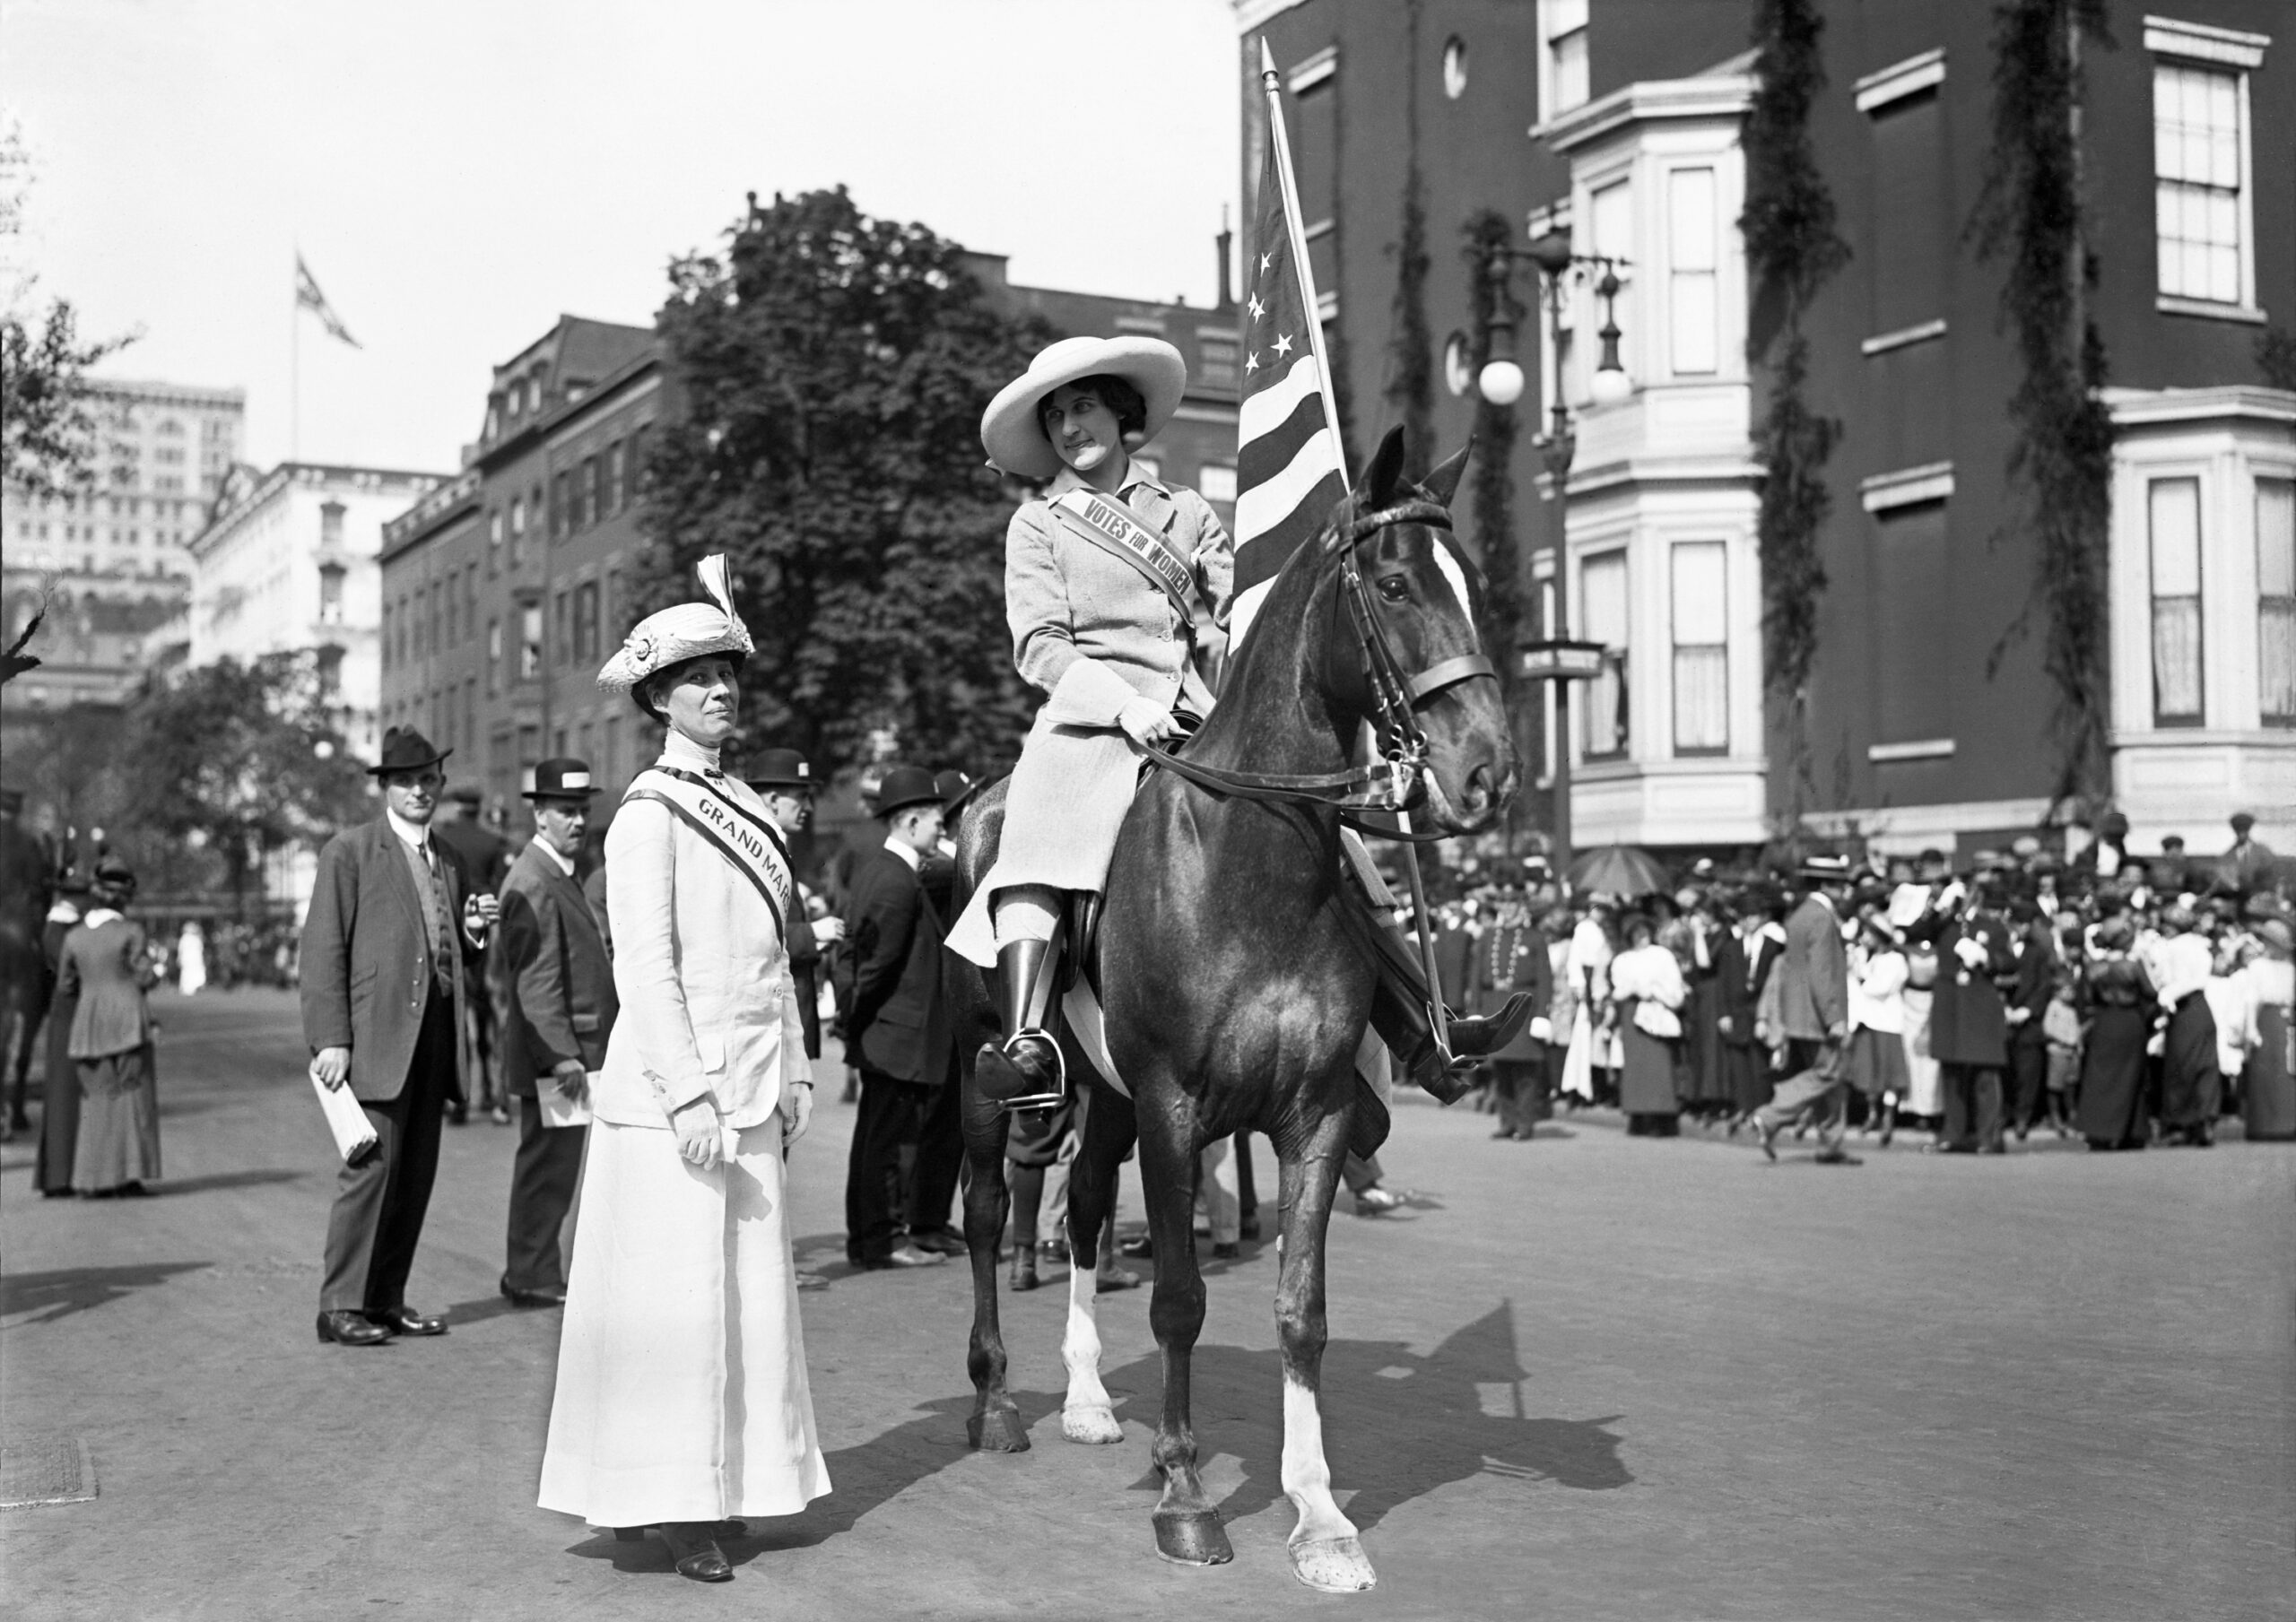 Misses Beiderhase and Milholland, 1912. Shot in New York City, May 4, 1912. Image of two women suffragists wearing banners. The woman on the left standing, is Josephine Beiderhase. The woman on the right seated on a horse carrying an American flag is Inez Milholland. (Mystic Seaport Rosenfeld Collection ANN.1984.187.6818)